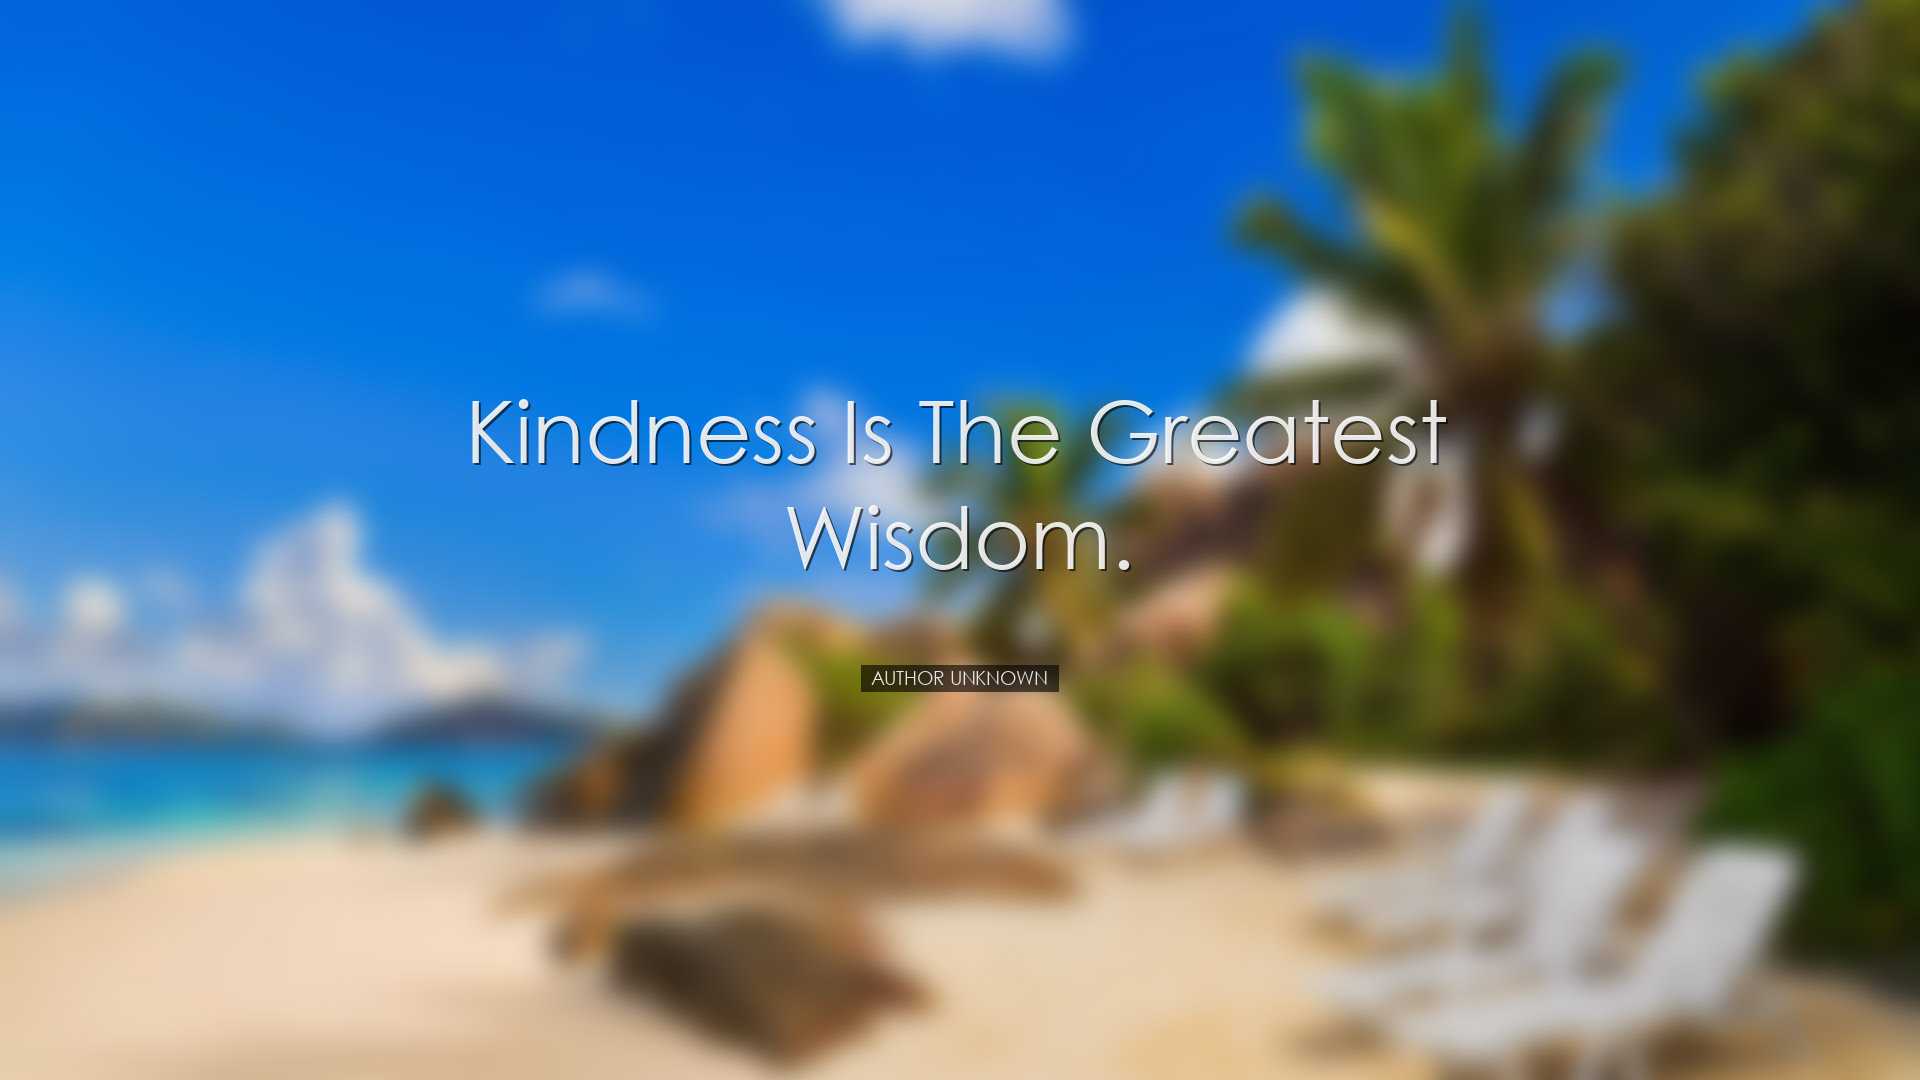 Kindness is the greatest wisdom. - Author Unknown